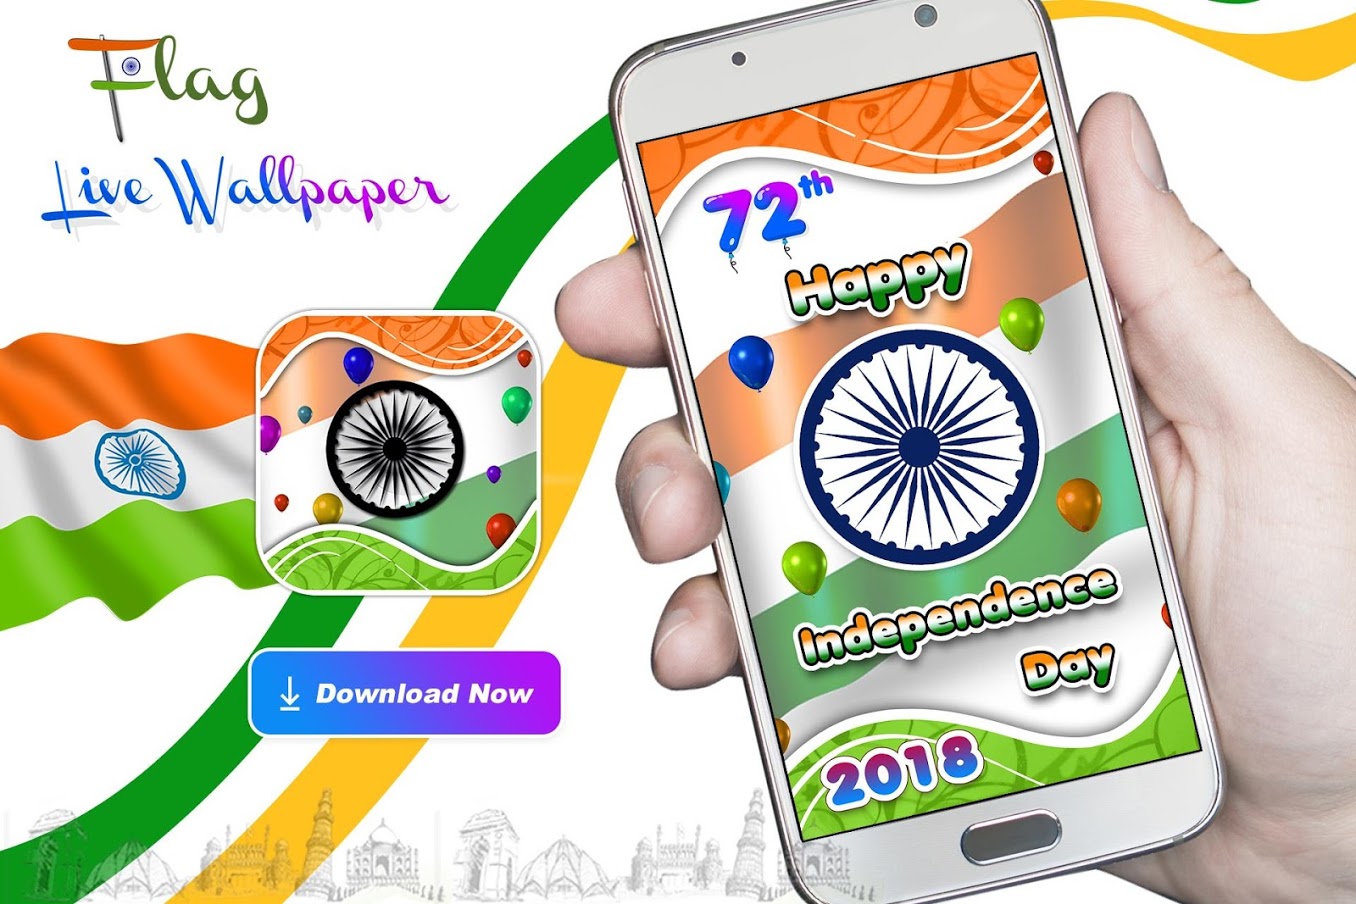 Indian Flag Live Wallpaper - Flag Independence Day India 72th - HD Wallpaper 